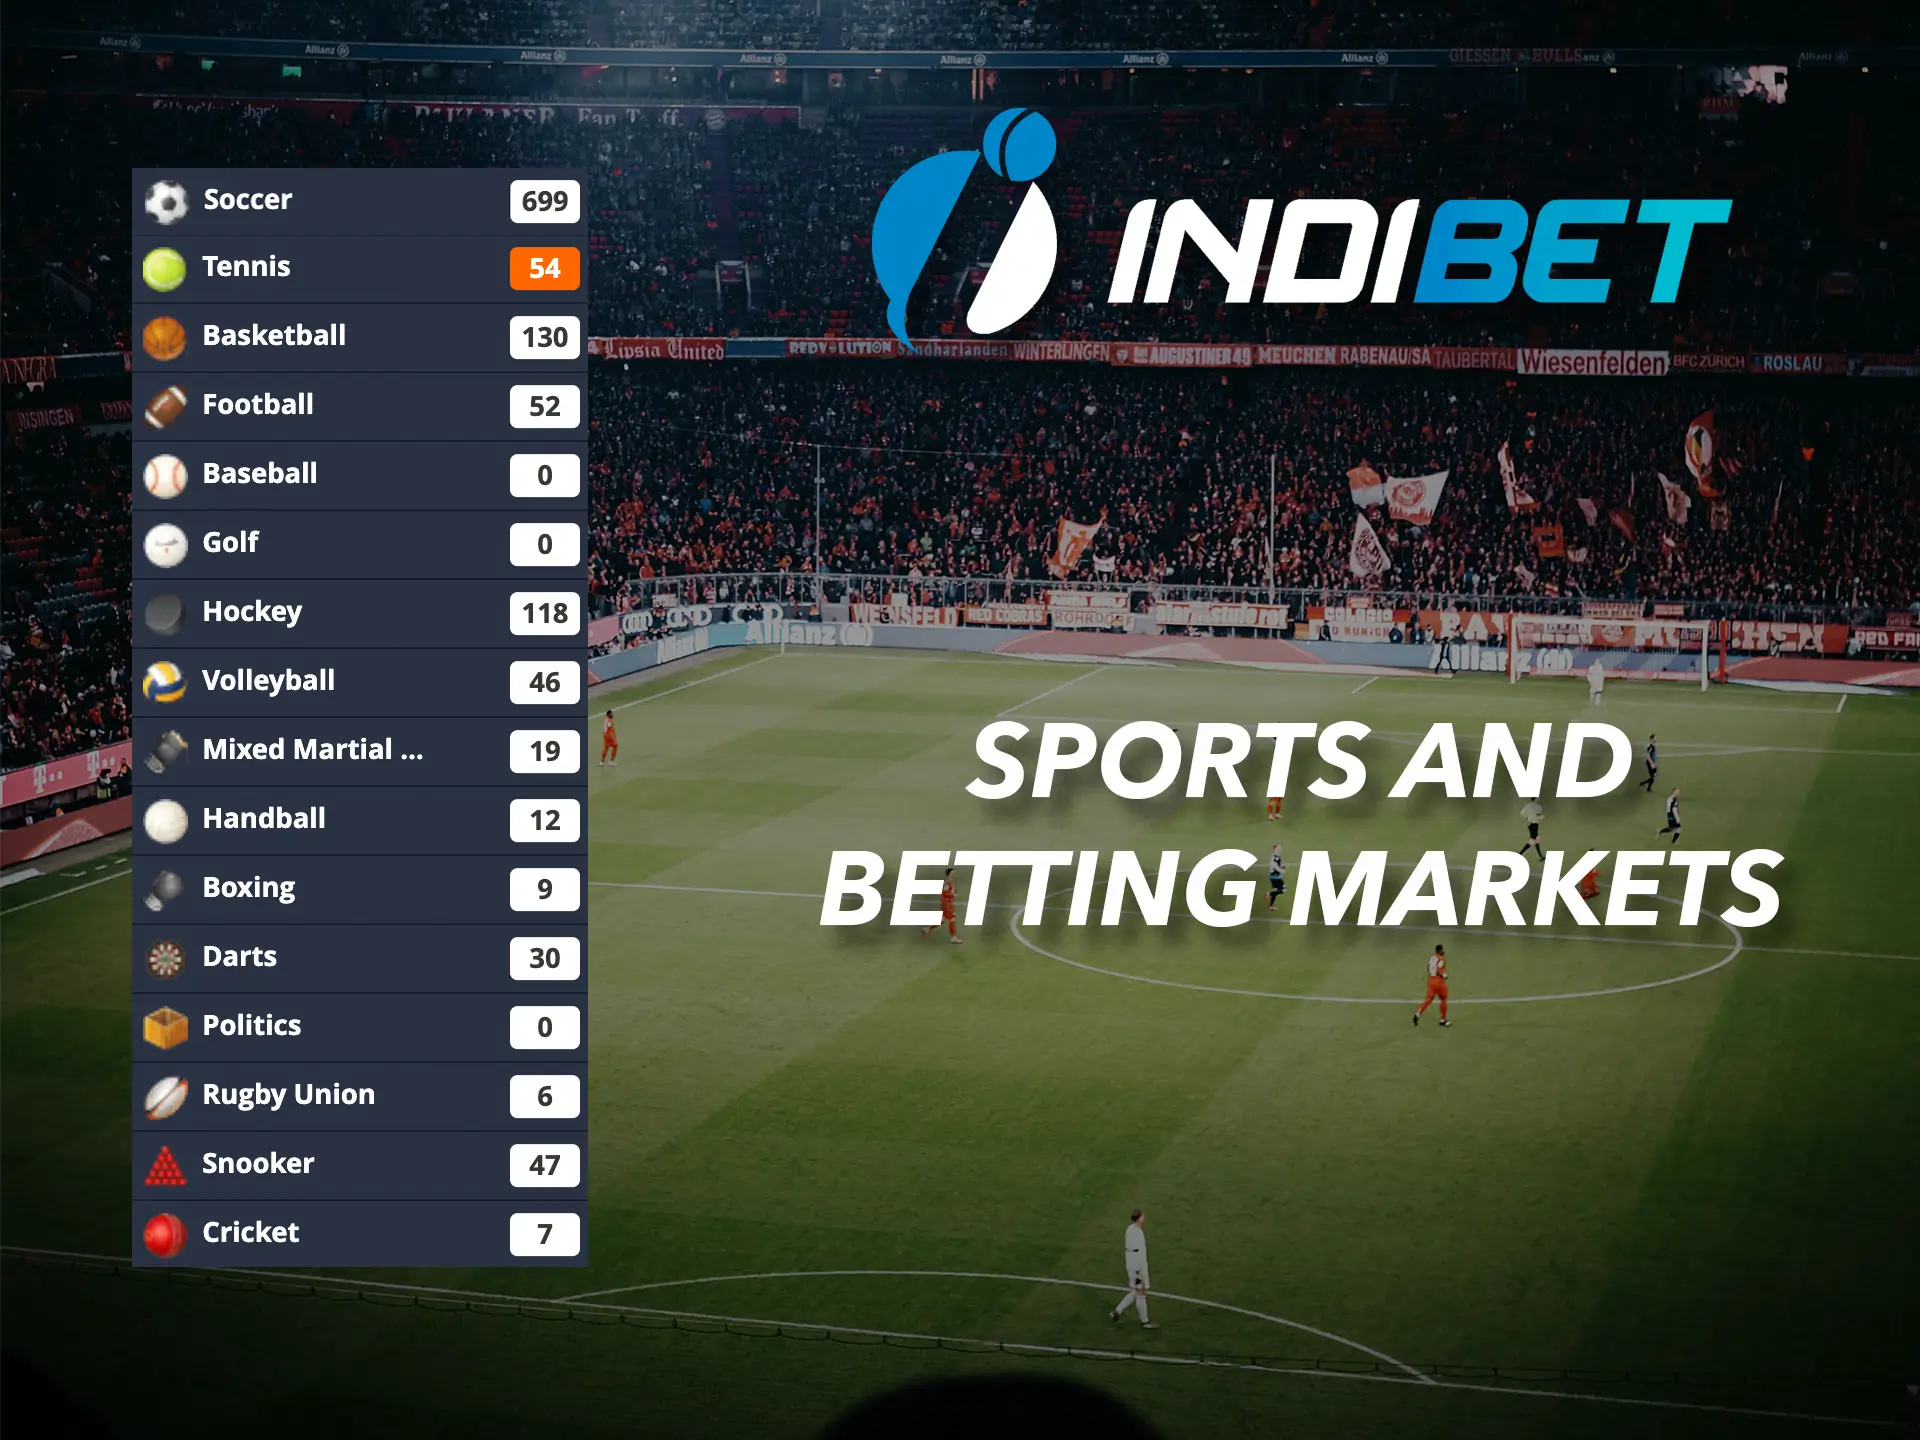 Make your choice from the featured sports disciplines to bet on at Indibet.